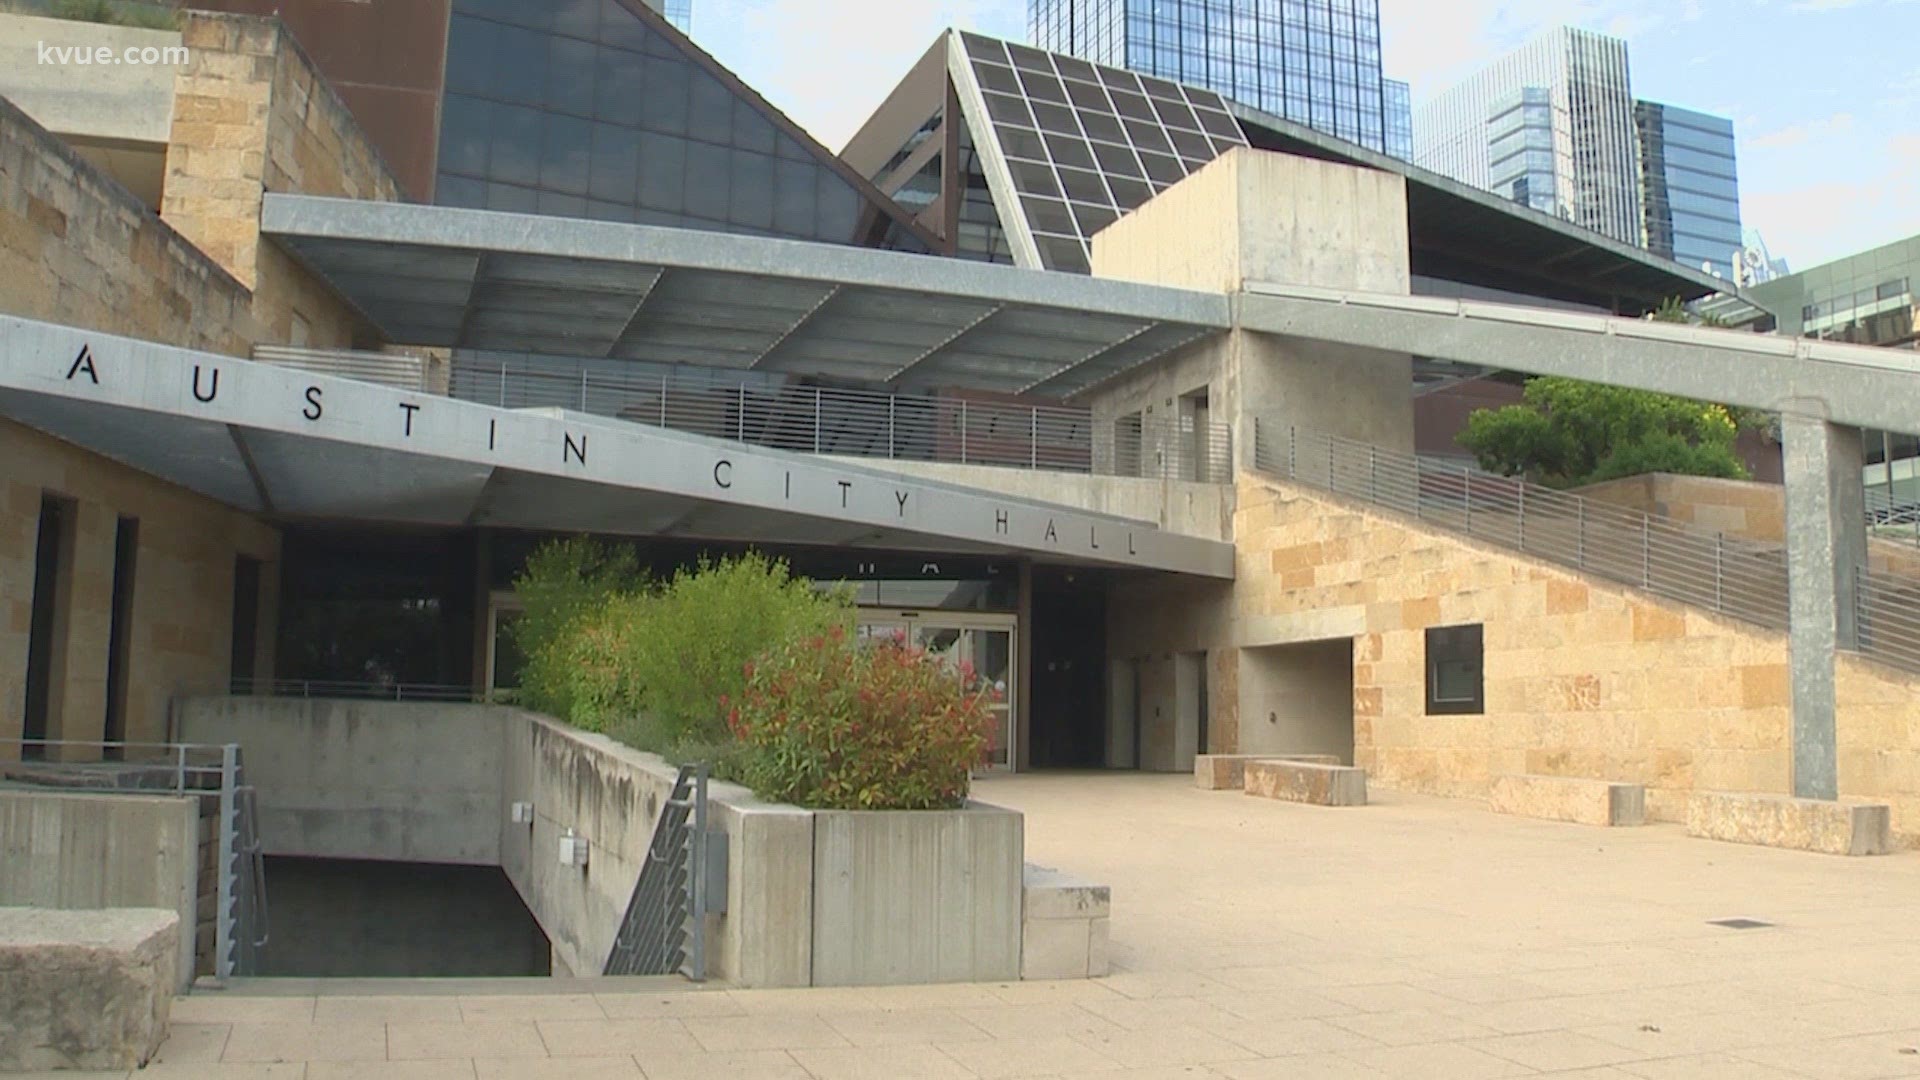 The City of Austin will reinstate its homeless camping ban. Prop B passed with 58% of the vote.